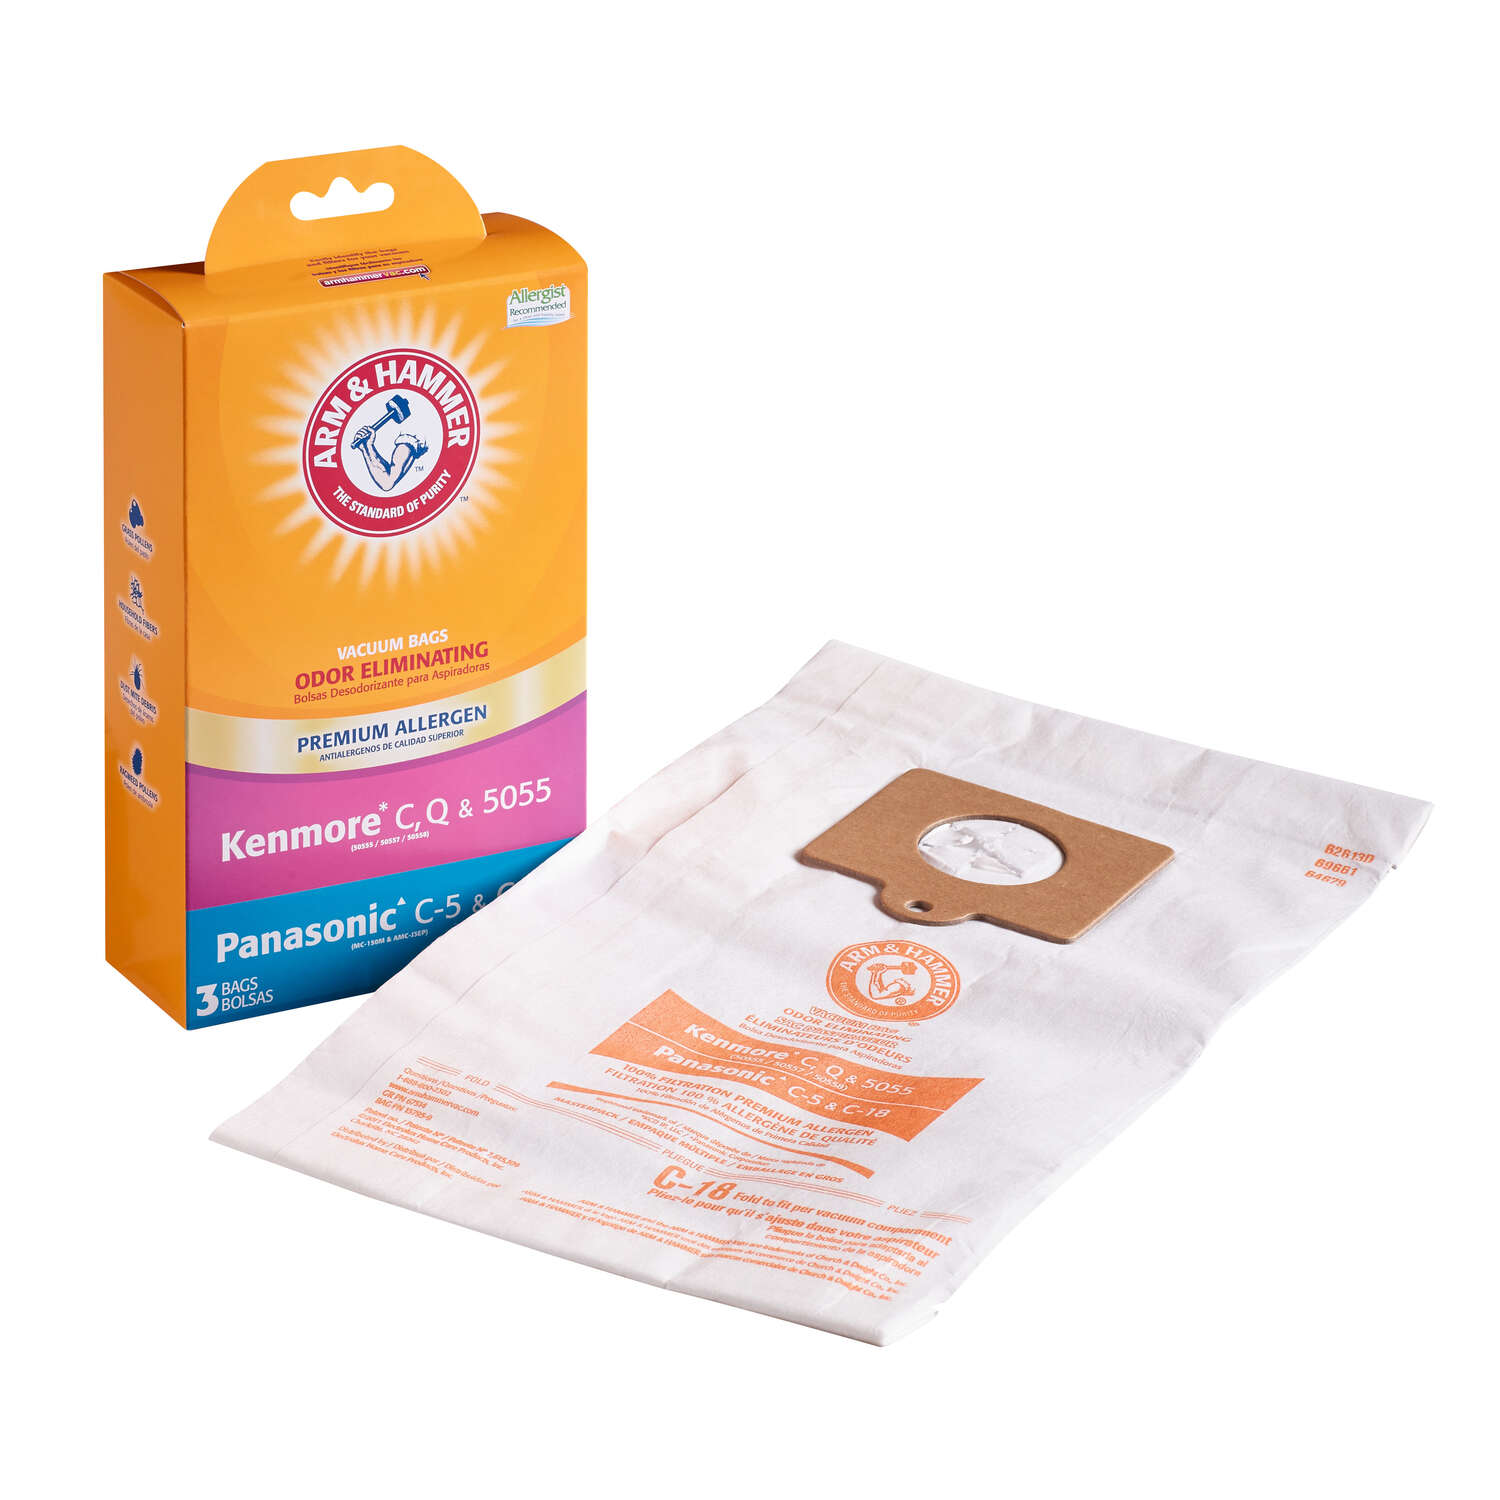 Details about   Hoover Type S Arm & Hammer Odor Eliminating Vacuum Bags 2 Packs of 3 Bags 